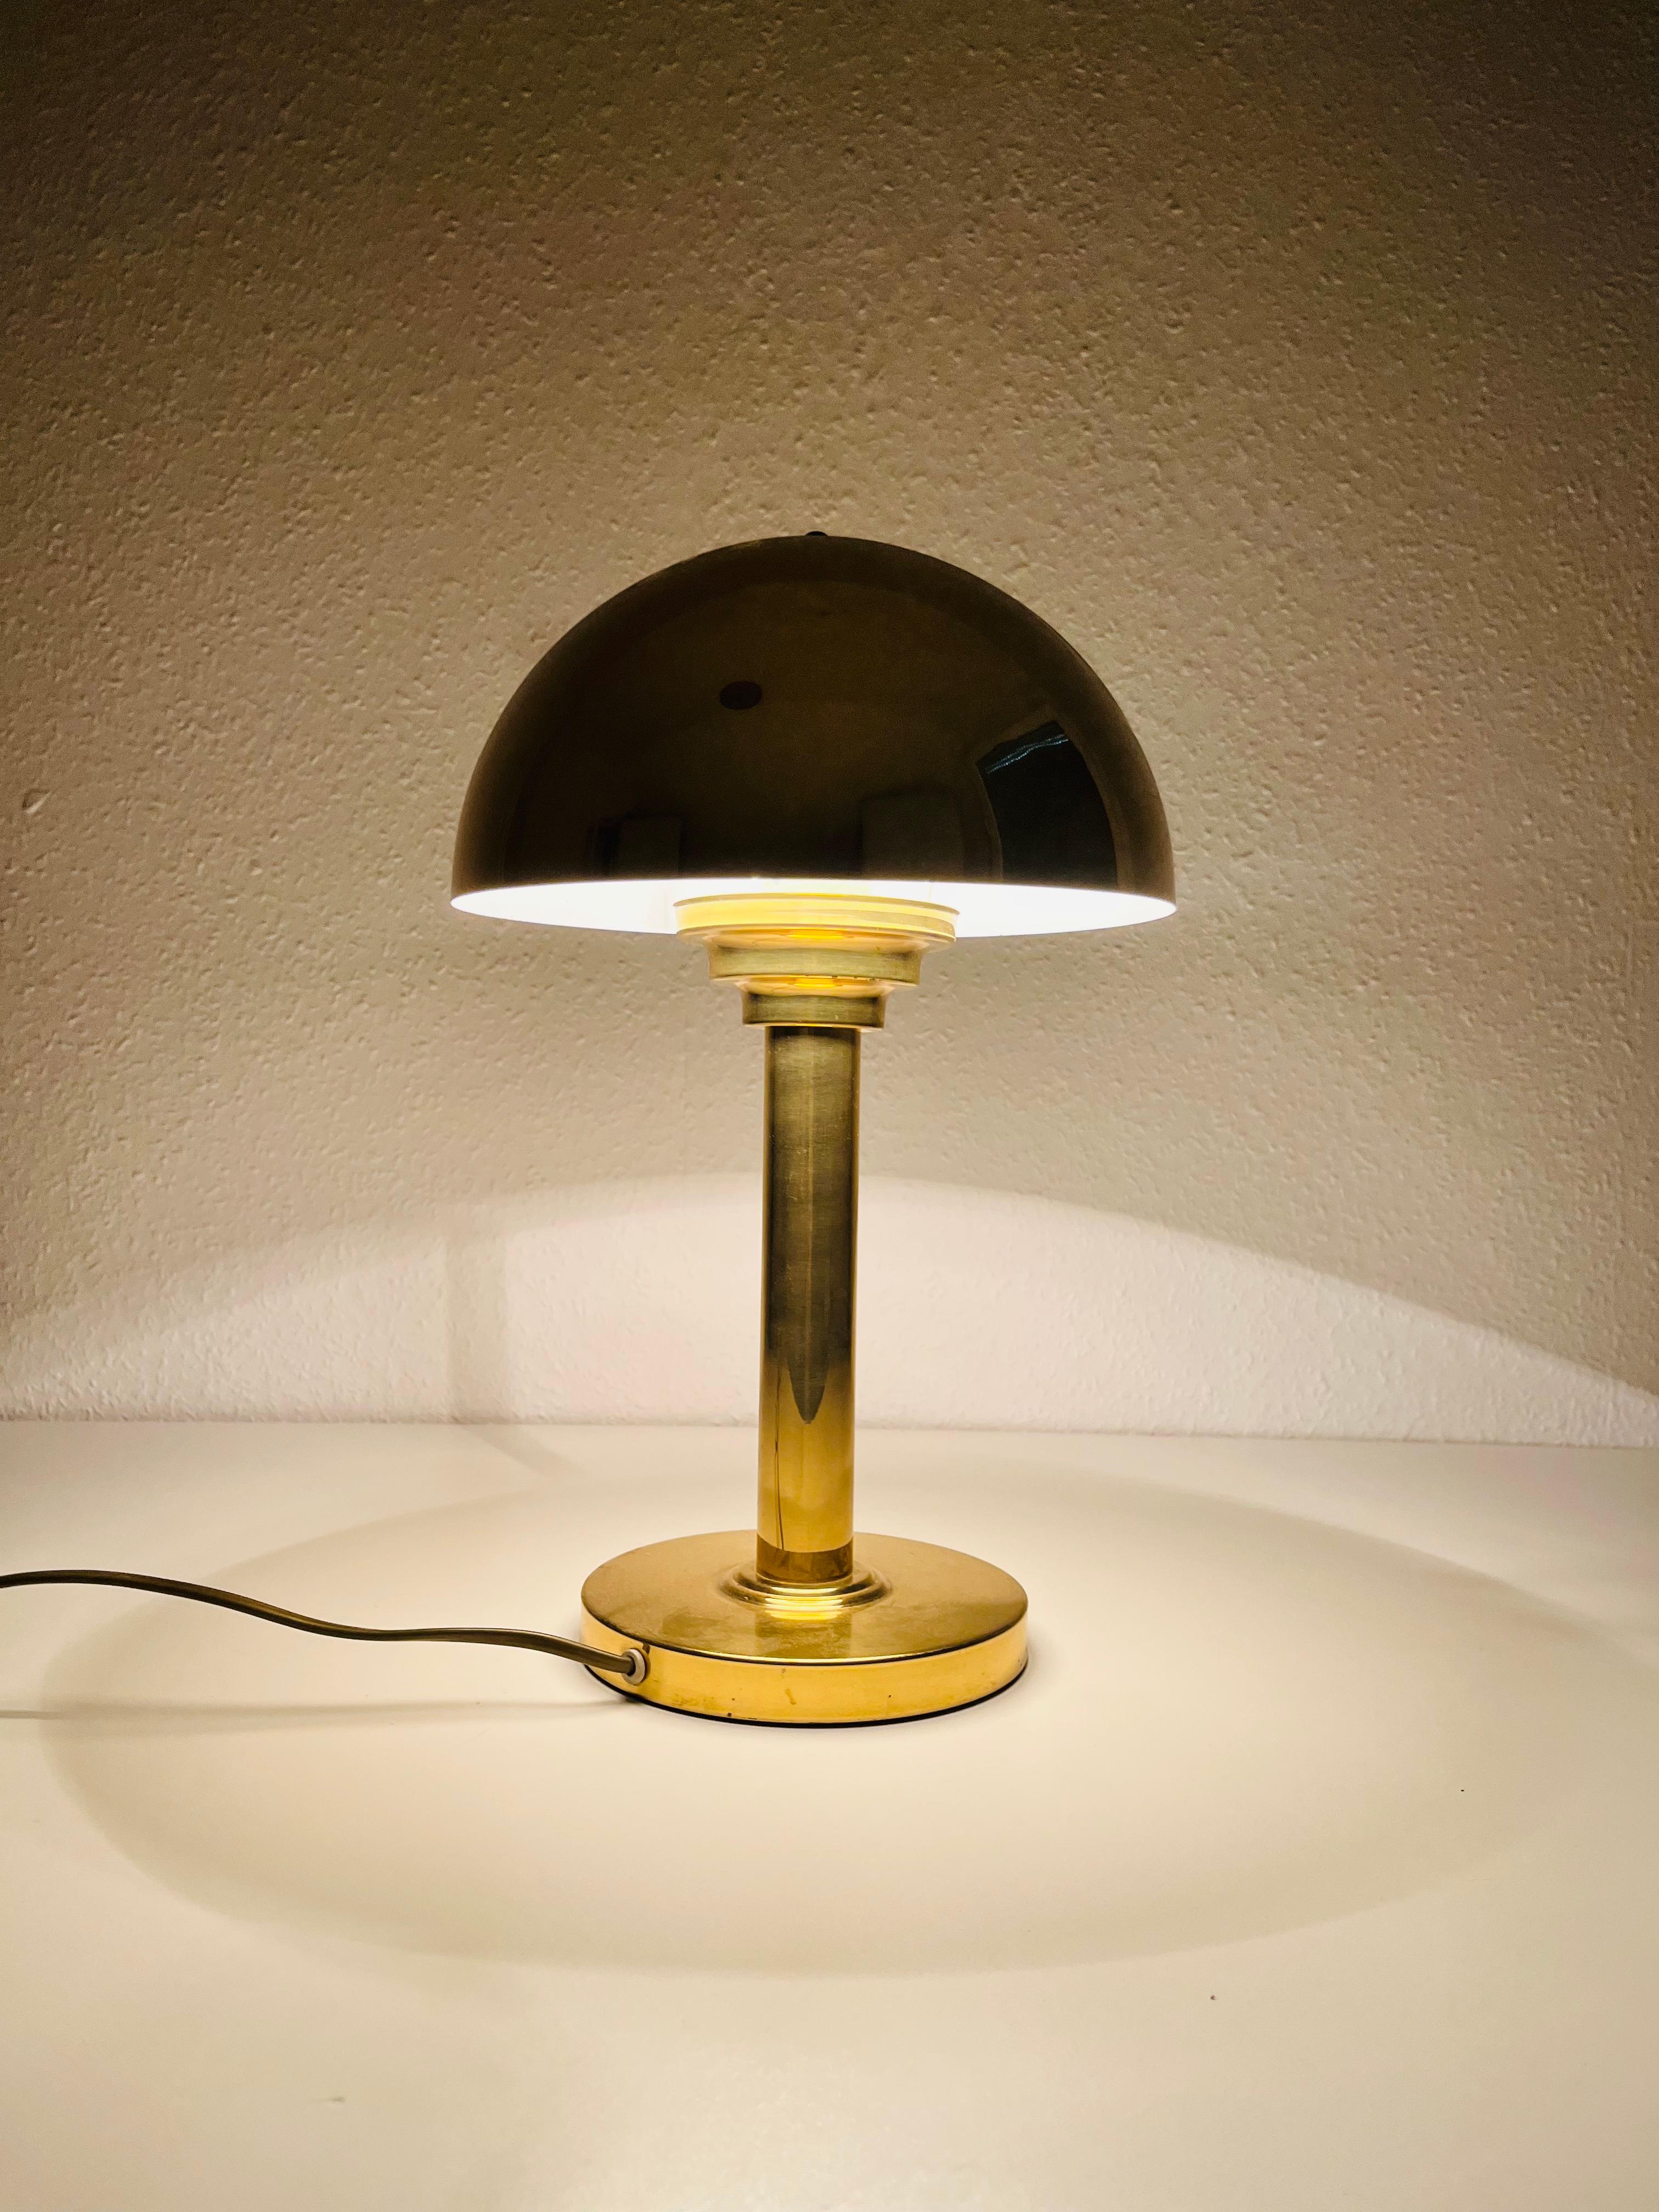 Extraordinary Mid-Century Modern Brass Table Lamp, 1960s For Sale 4